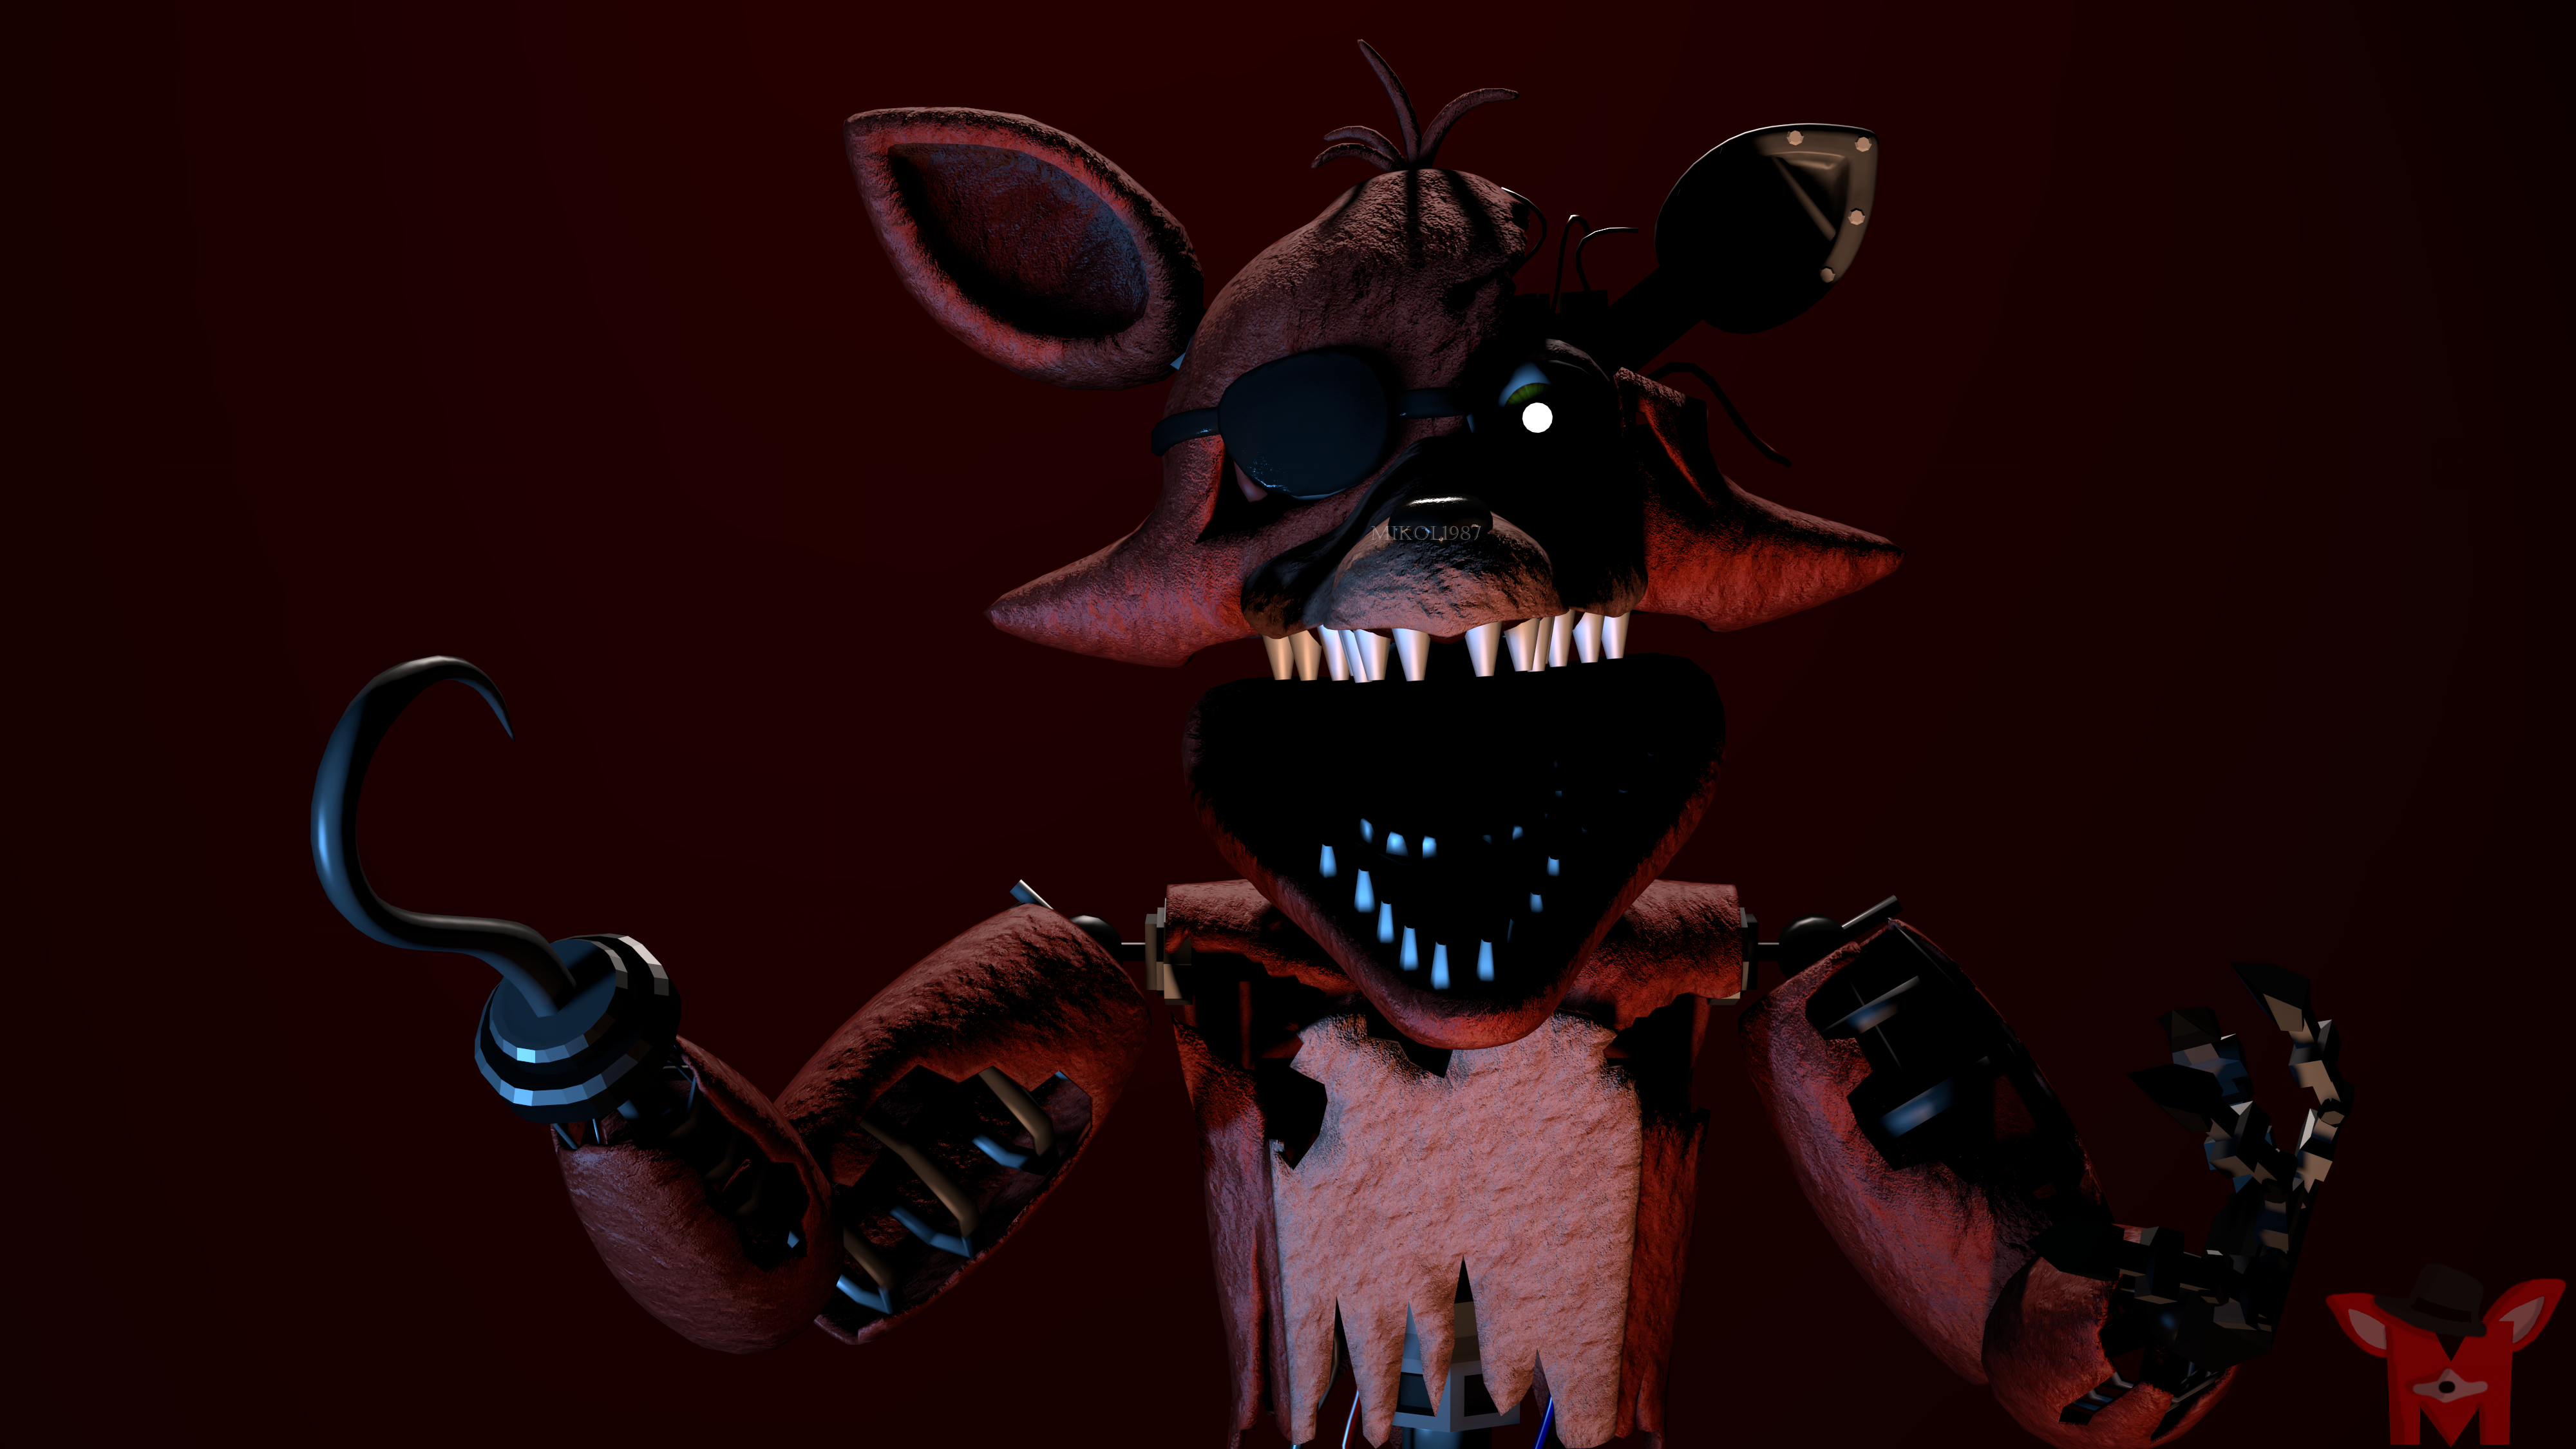 FNaF SFM Withered Foxy By Mikol1987 On DeviantArt.